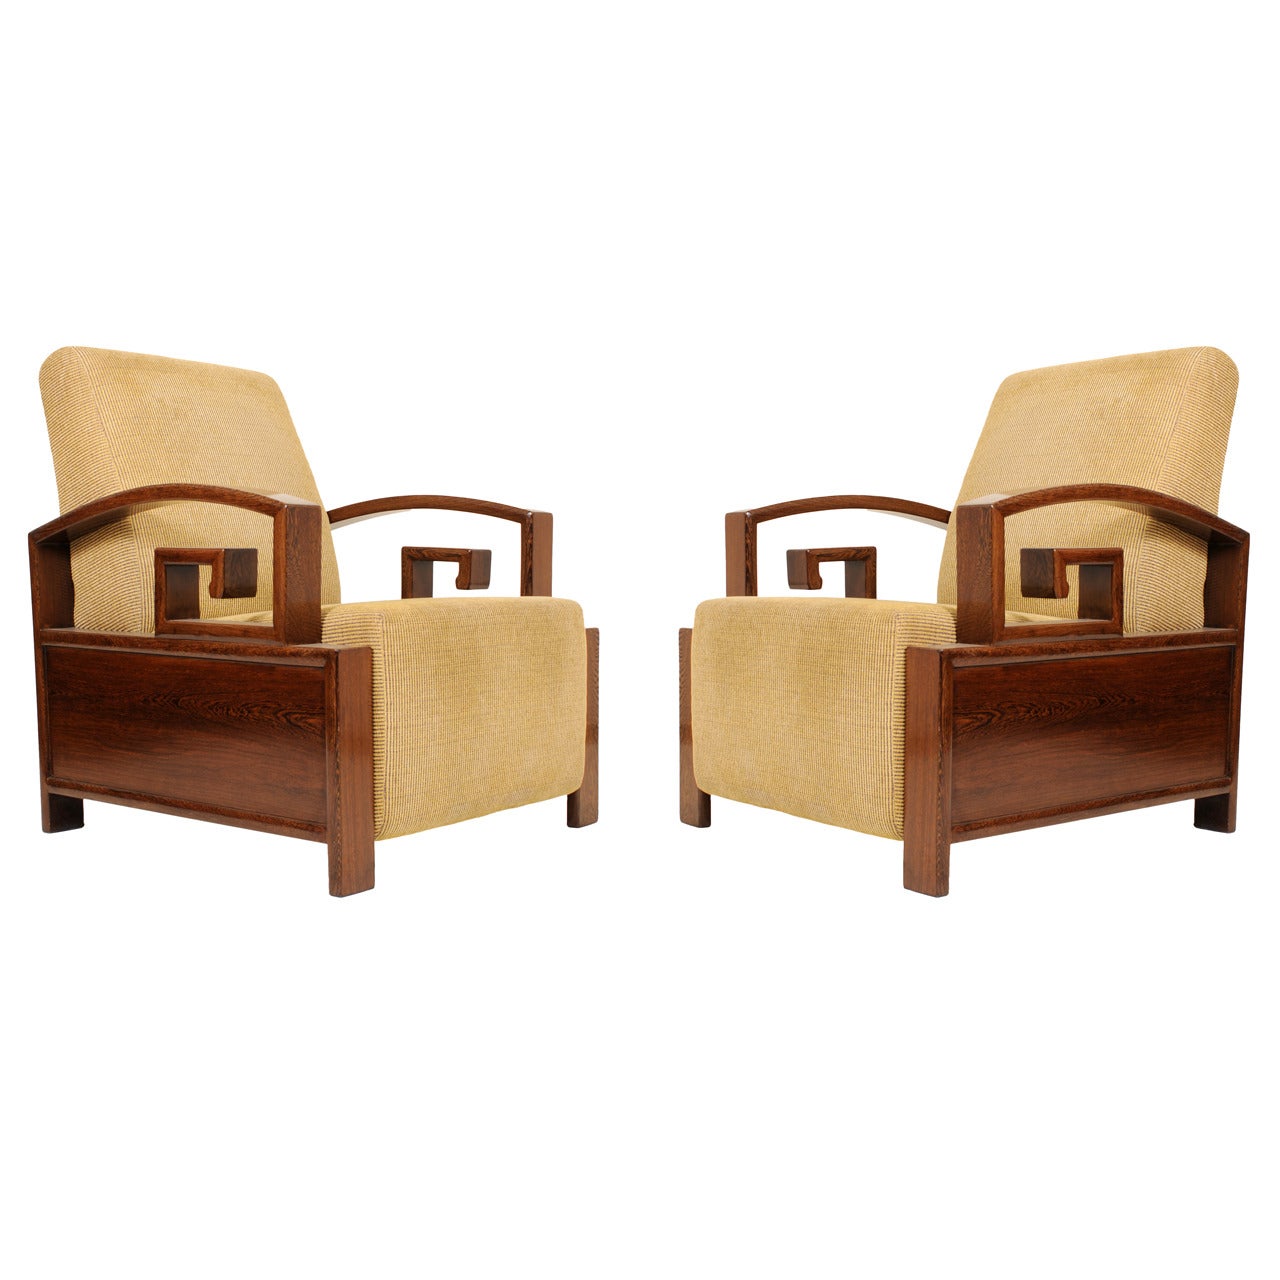 Pair of Chinese Jichimu Deco Chairs with Crooked Dragon Arms